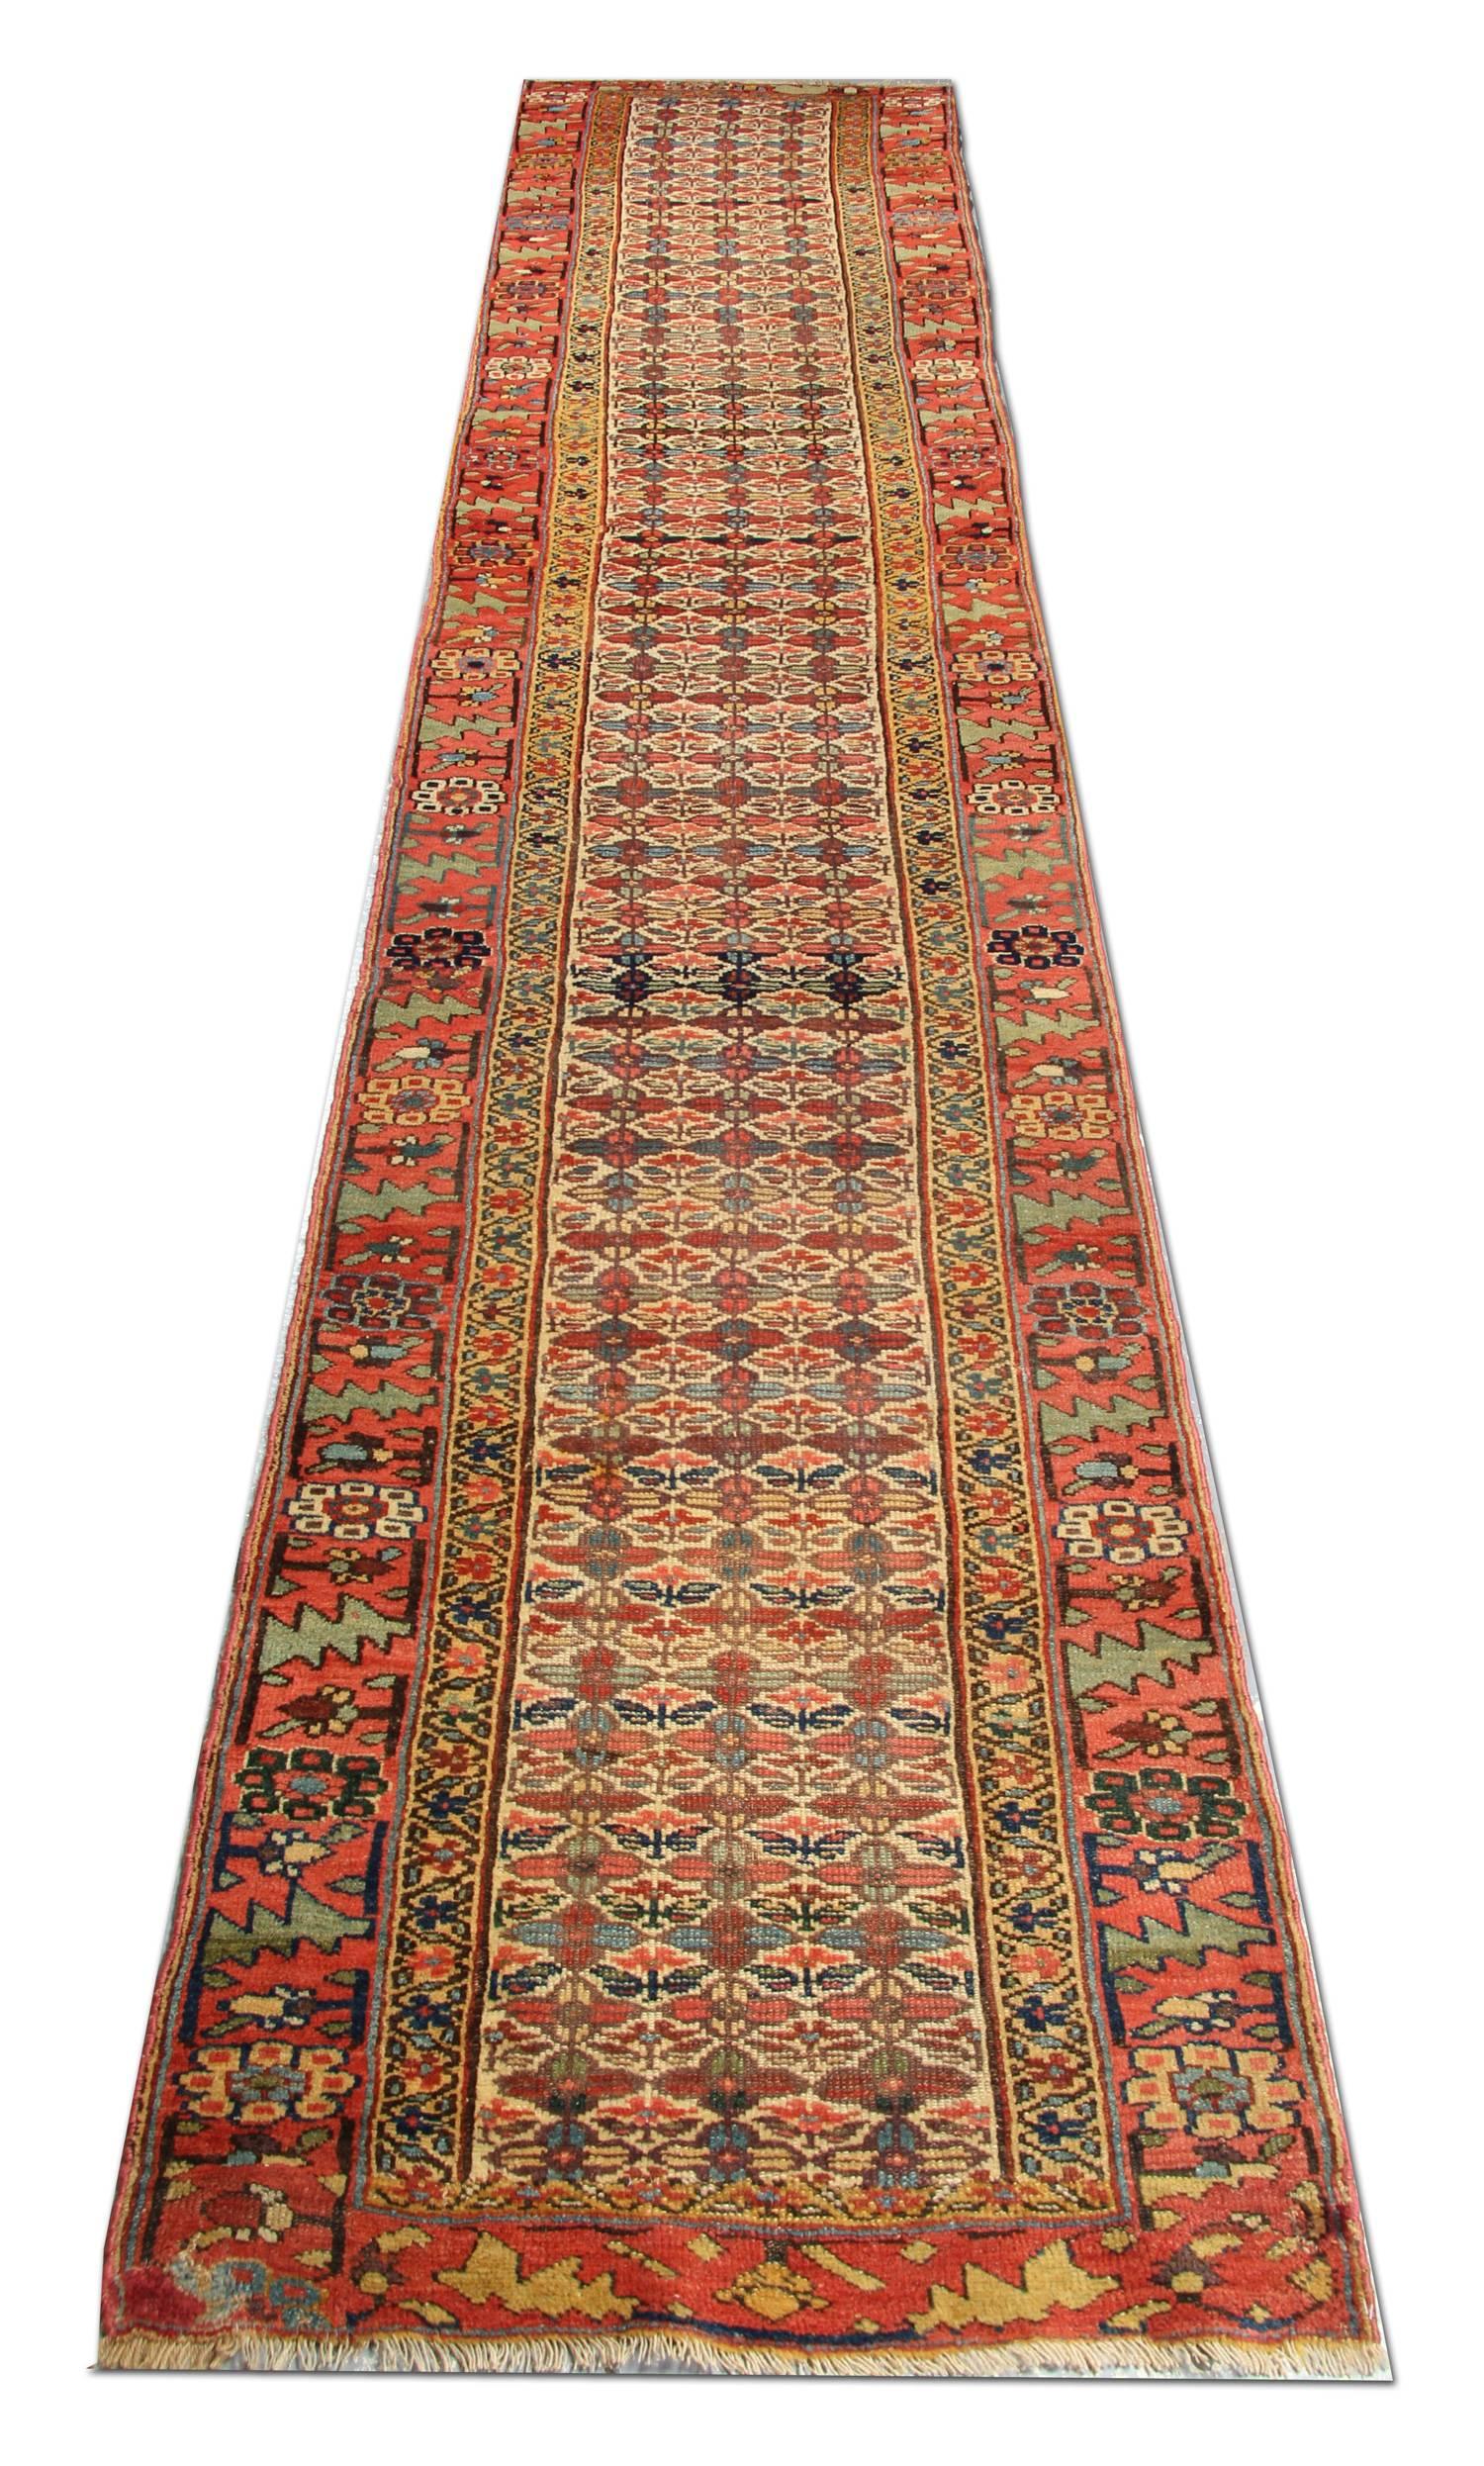 These beautiful antique Shirvan rugs and runners have been woven in the mountainous region of Caucasus and dates from the second half of the 19th century. The floral rug displays an all-over geometric rug design of repeat diamond shapes in multiple